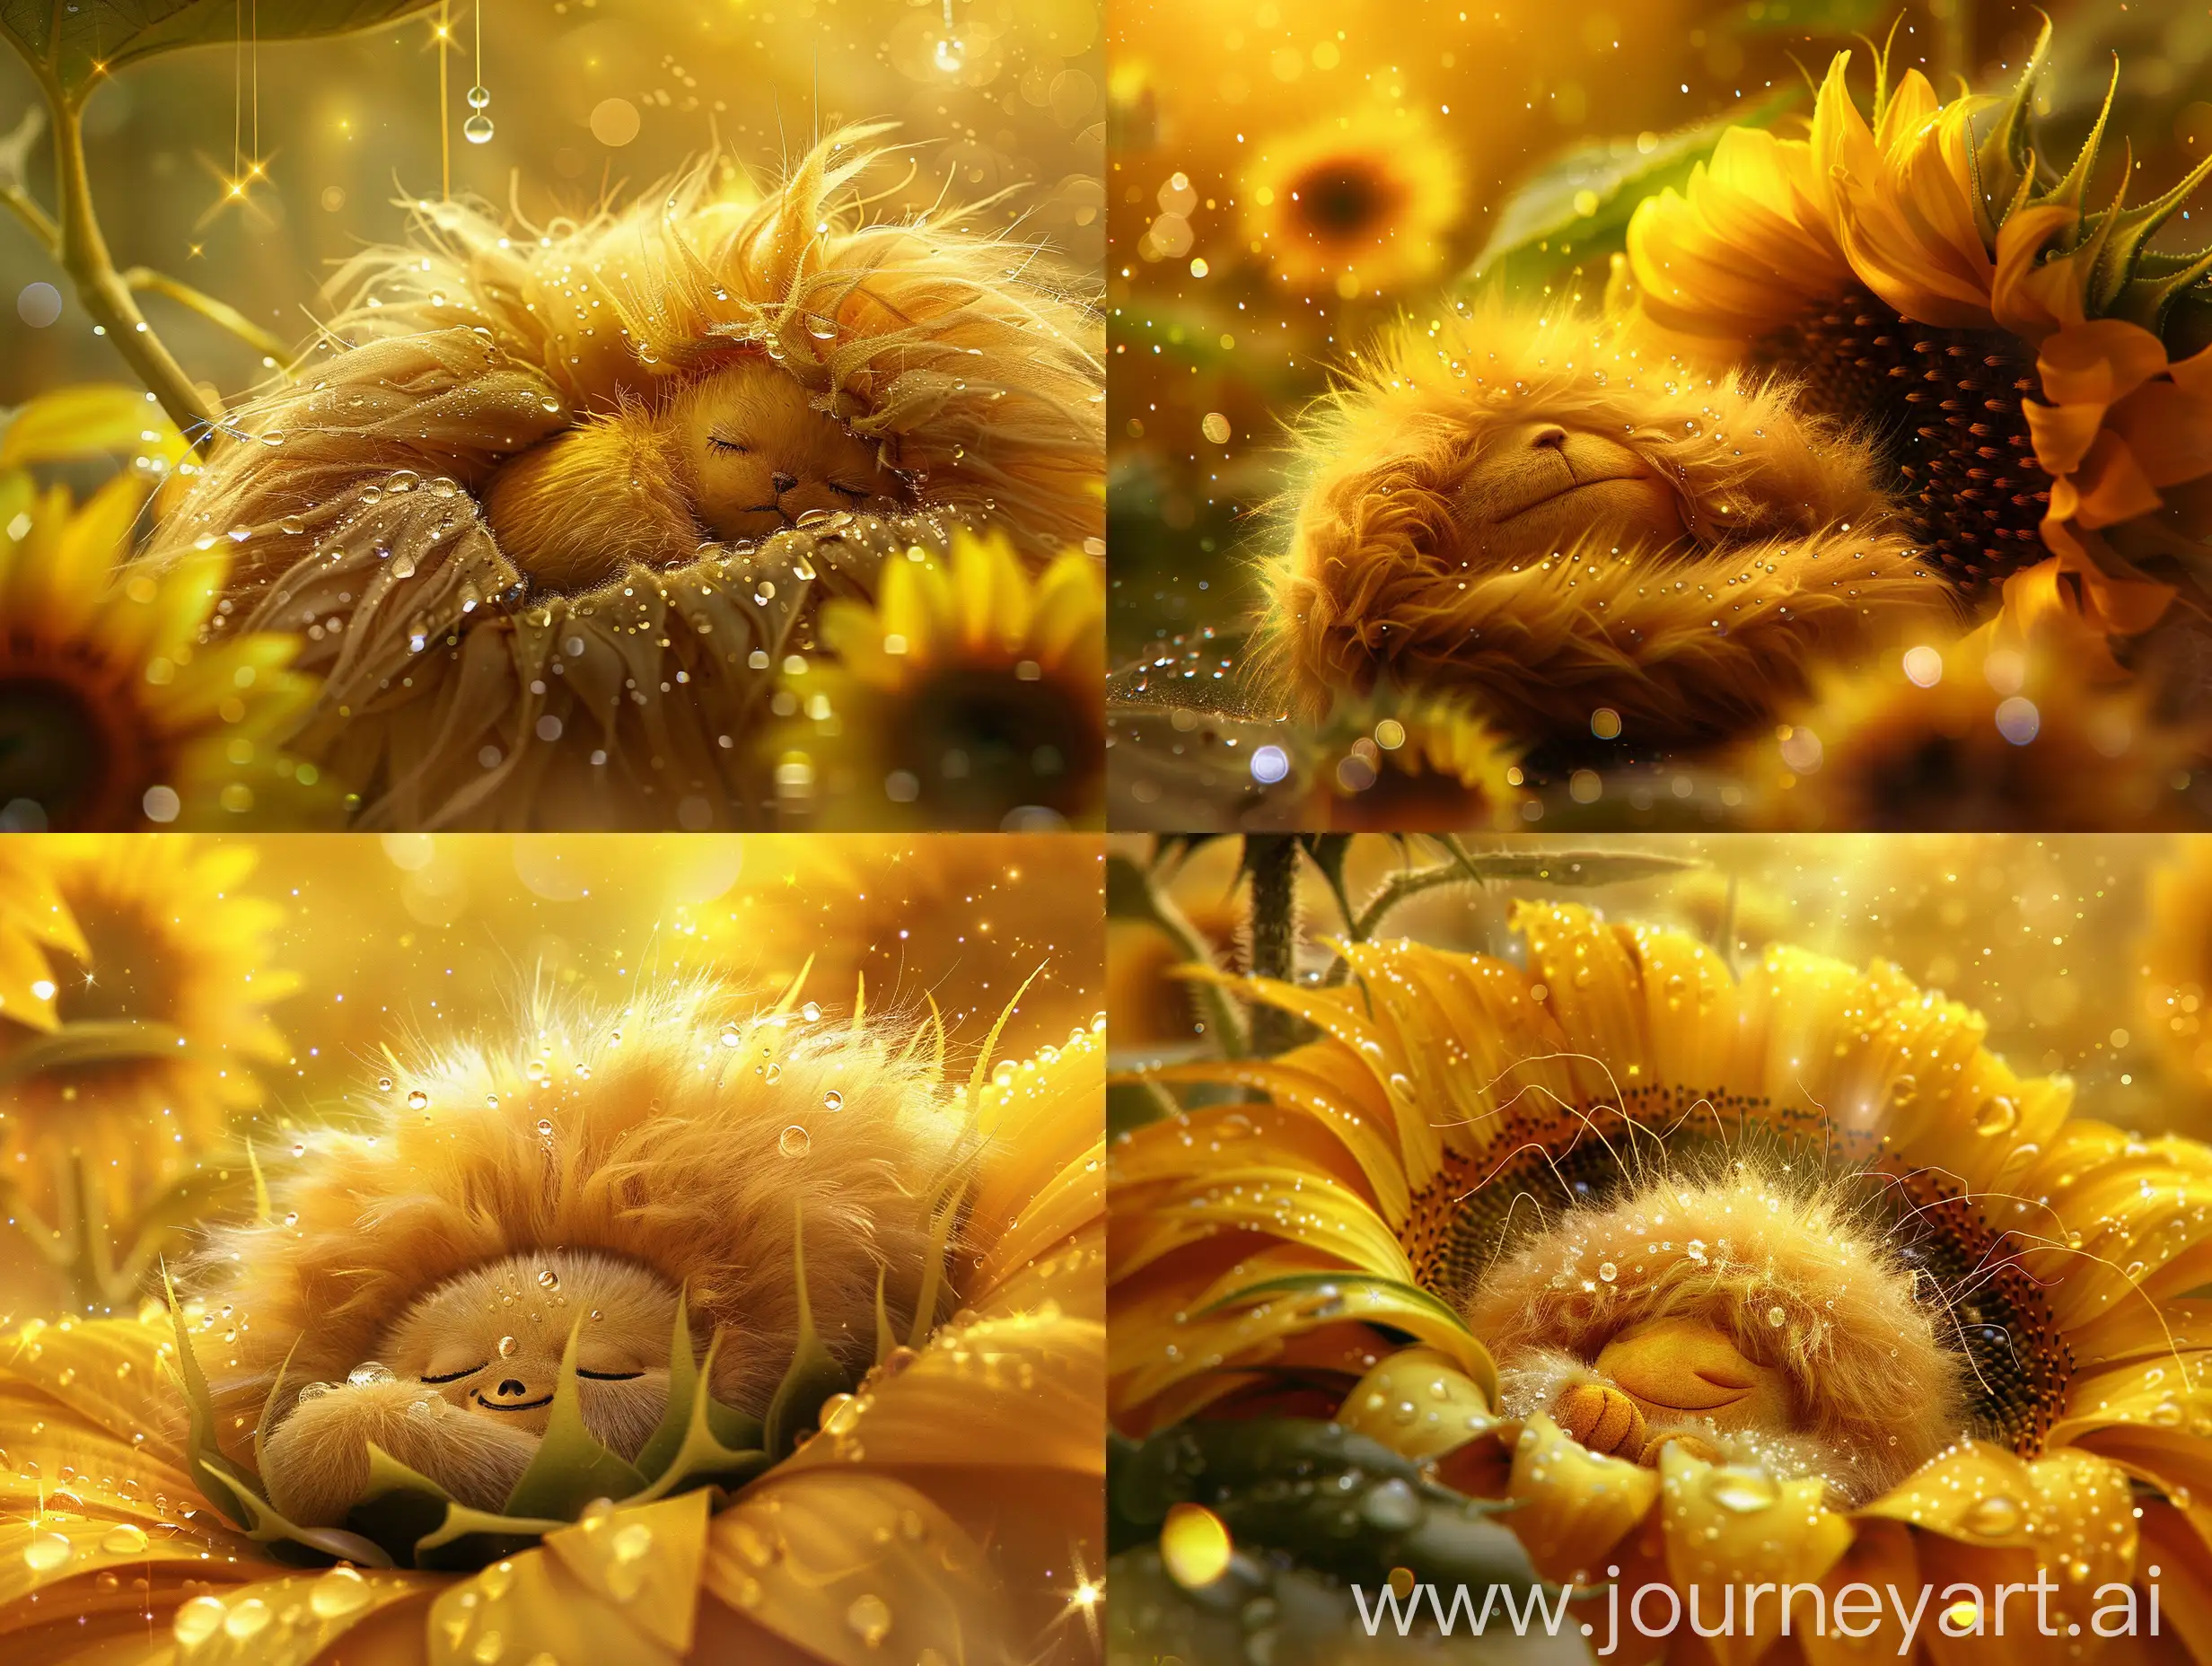 Adorable-Tiny-Fluffy-Creature-Sleeping-in-Giant-Sunflower